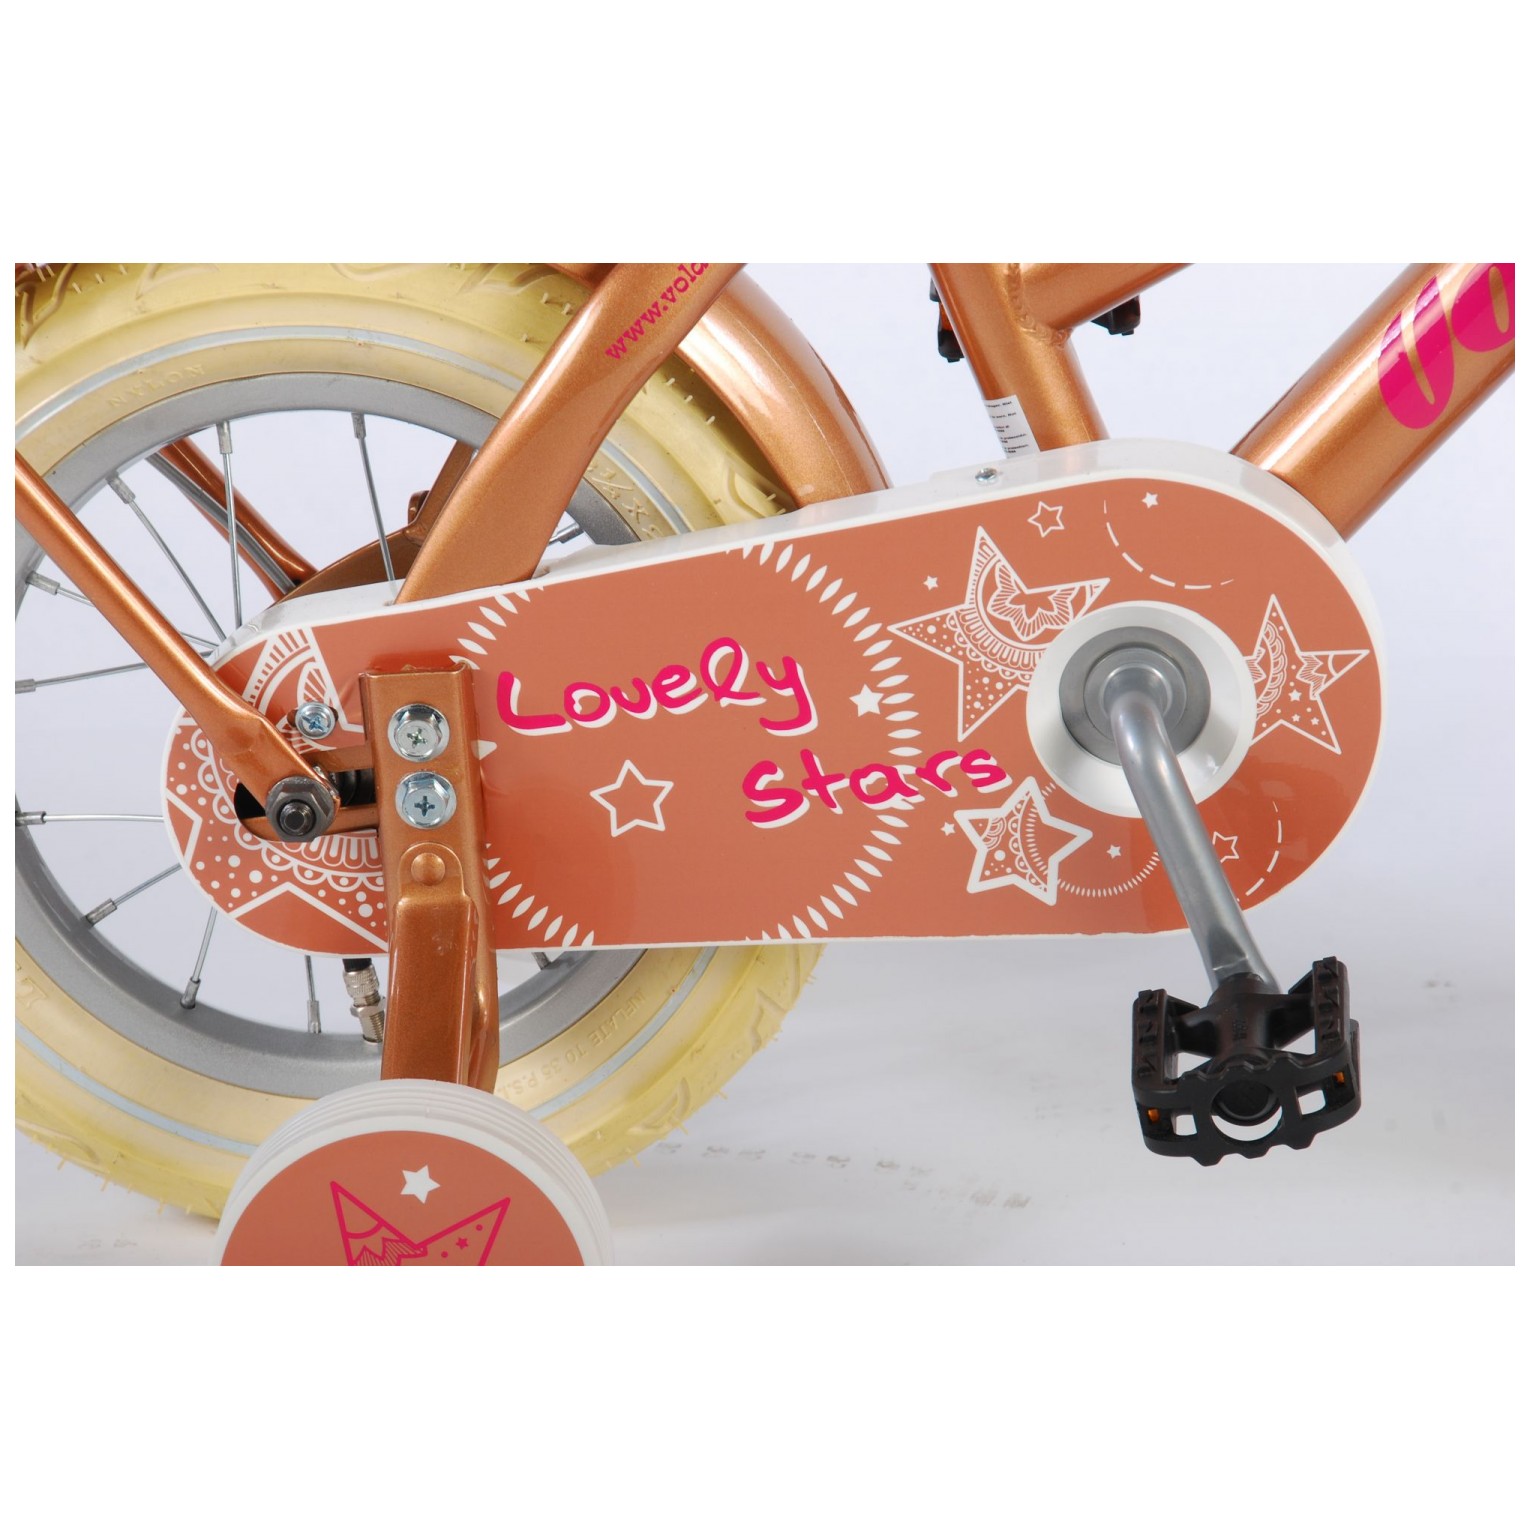 Volare Lovely Stars Fiets - 12 inch - Goud